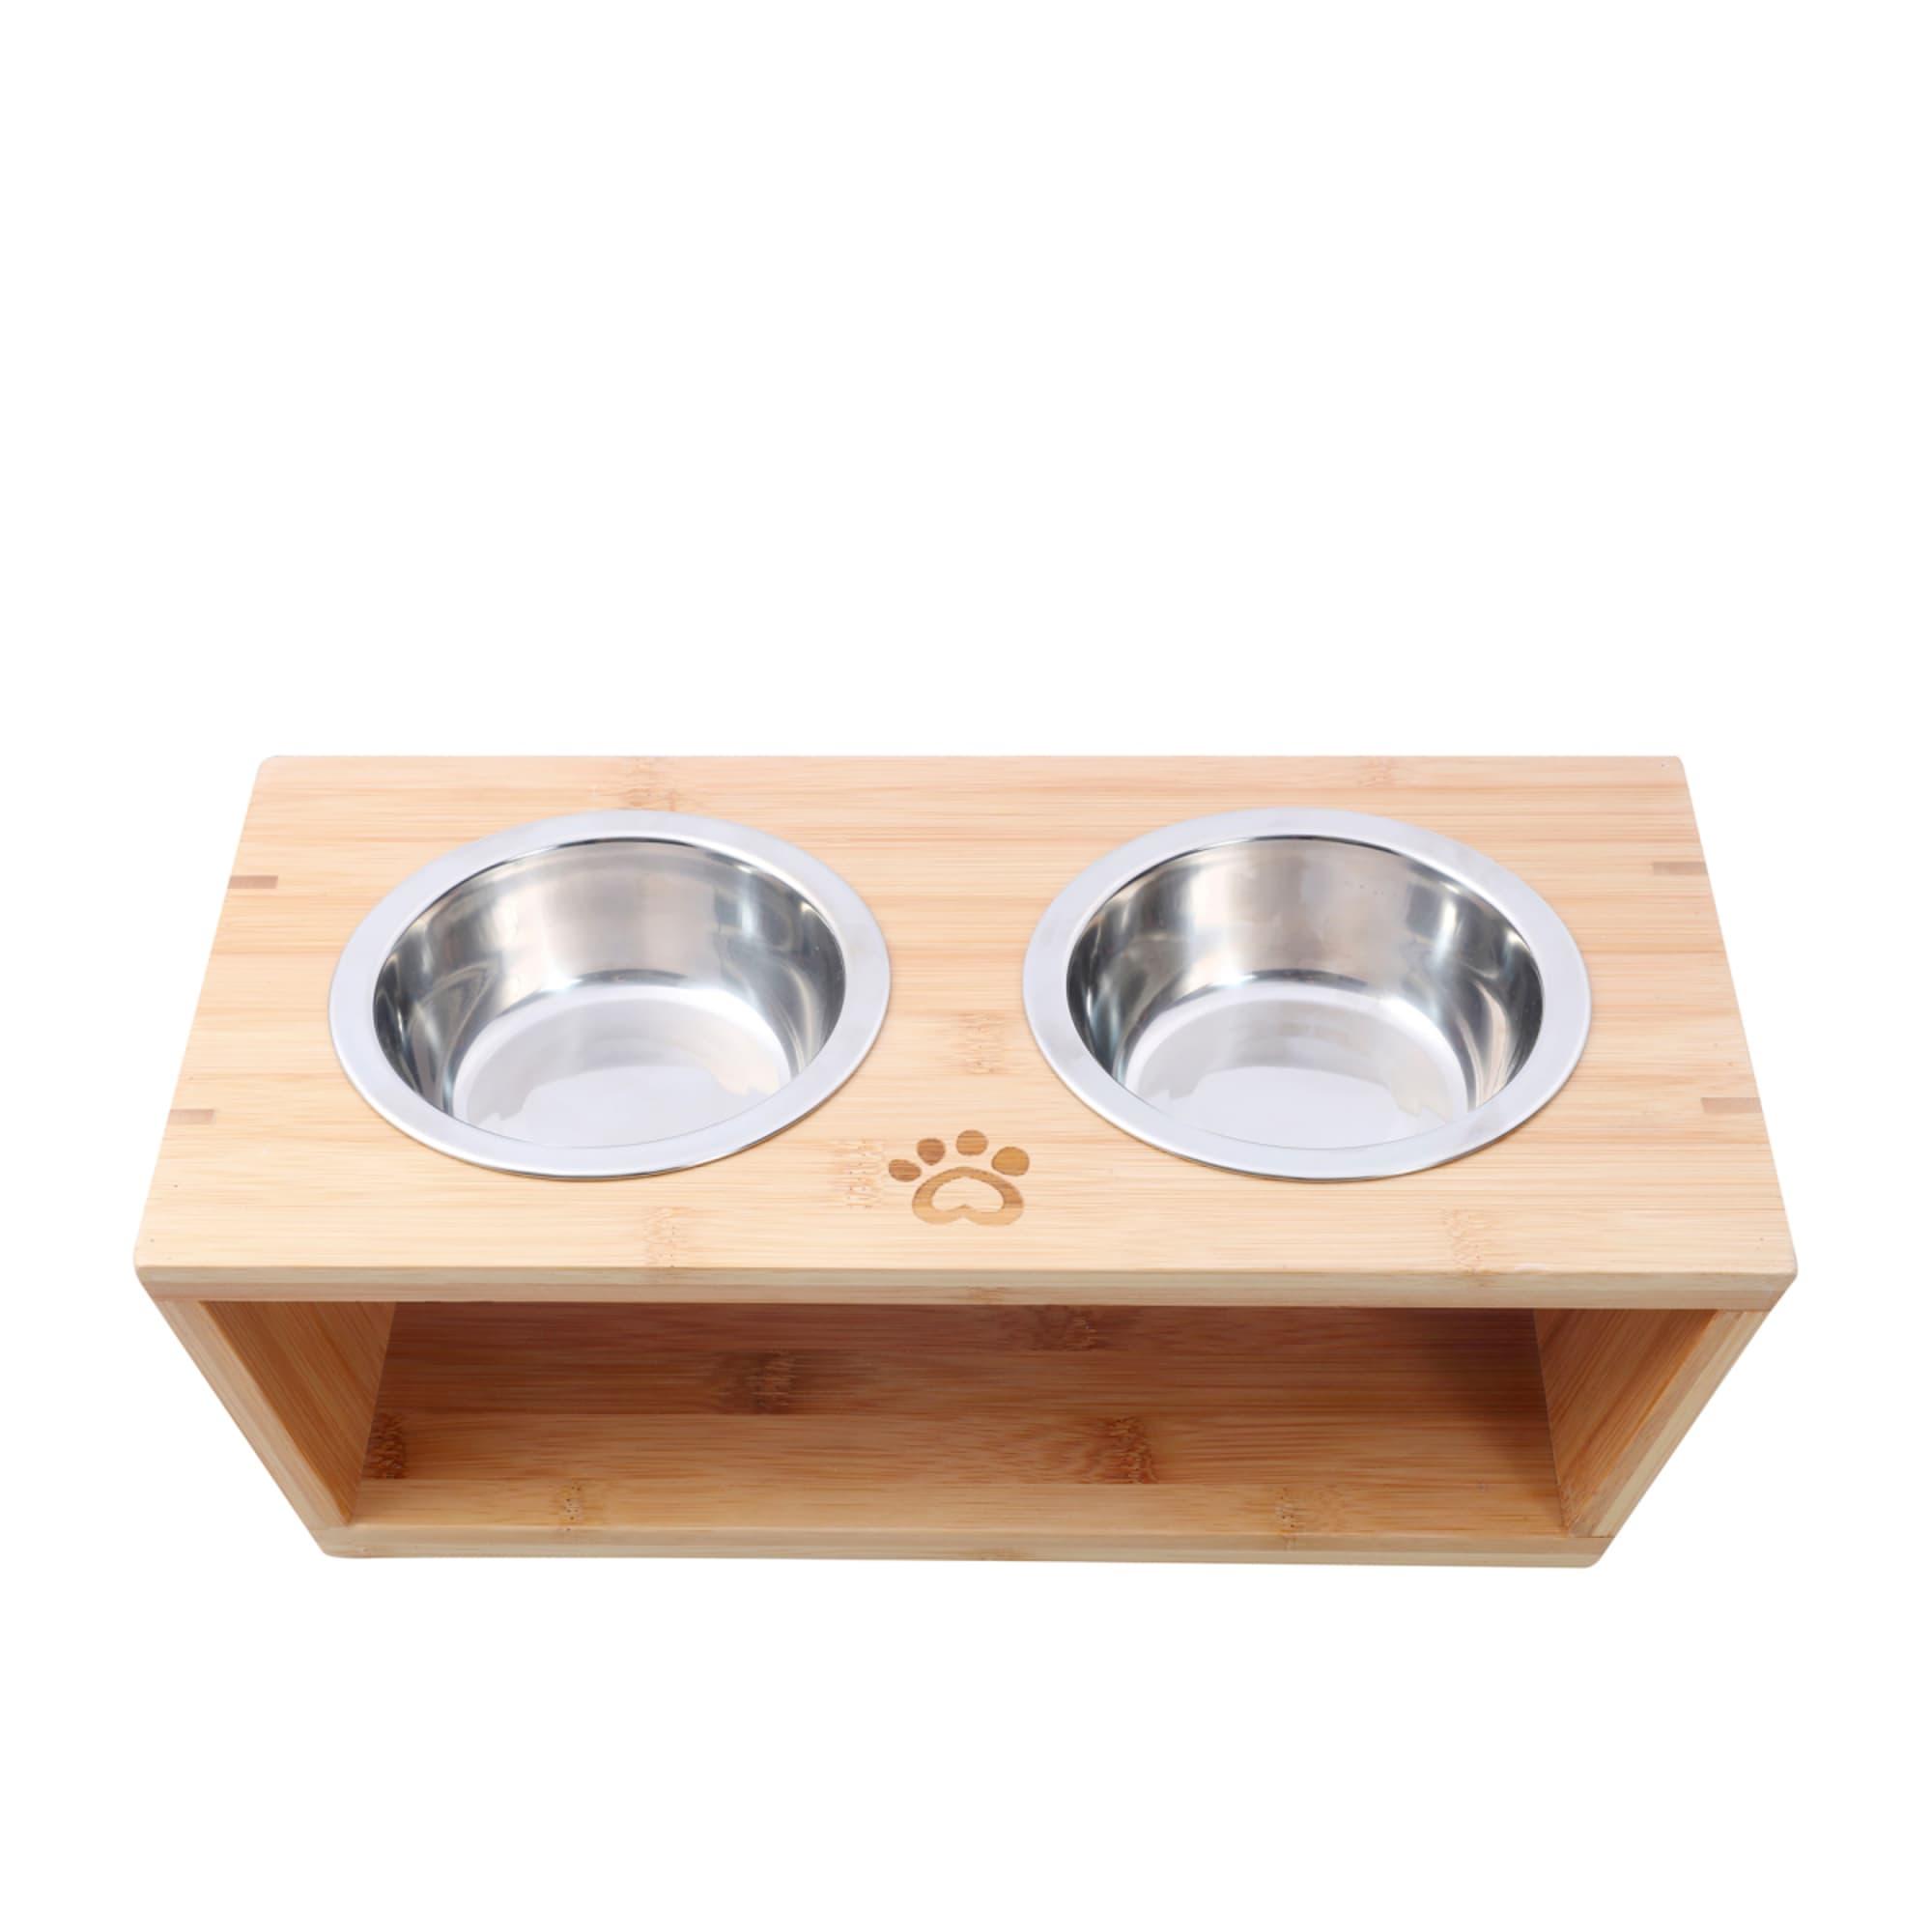 Charlie's Bamboo Dog Feeder with Stainless Steel Bowls Large Natural Image 3